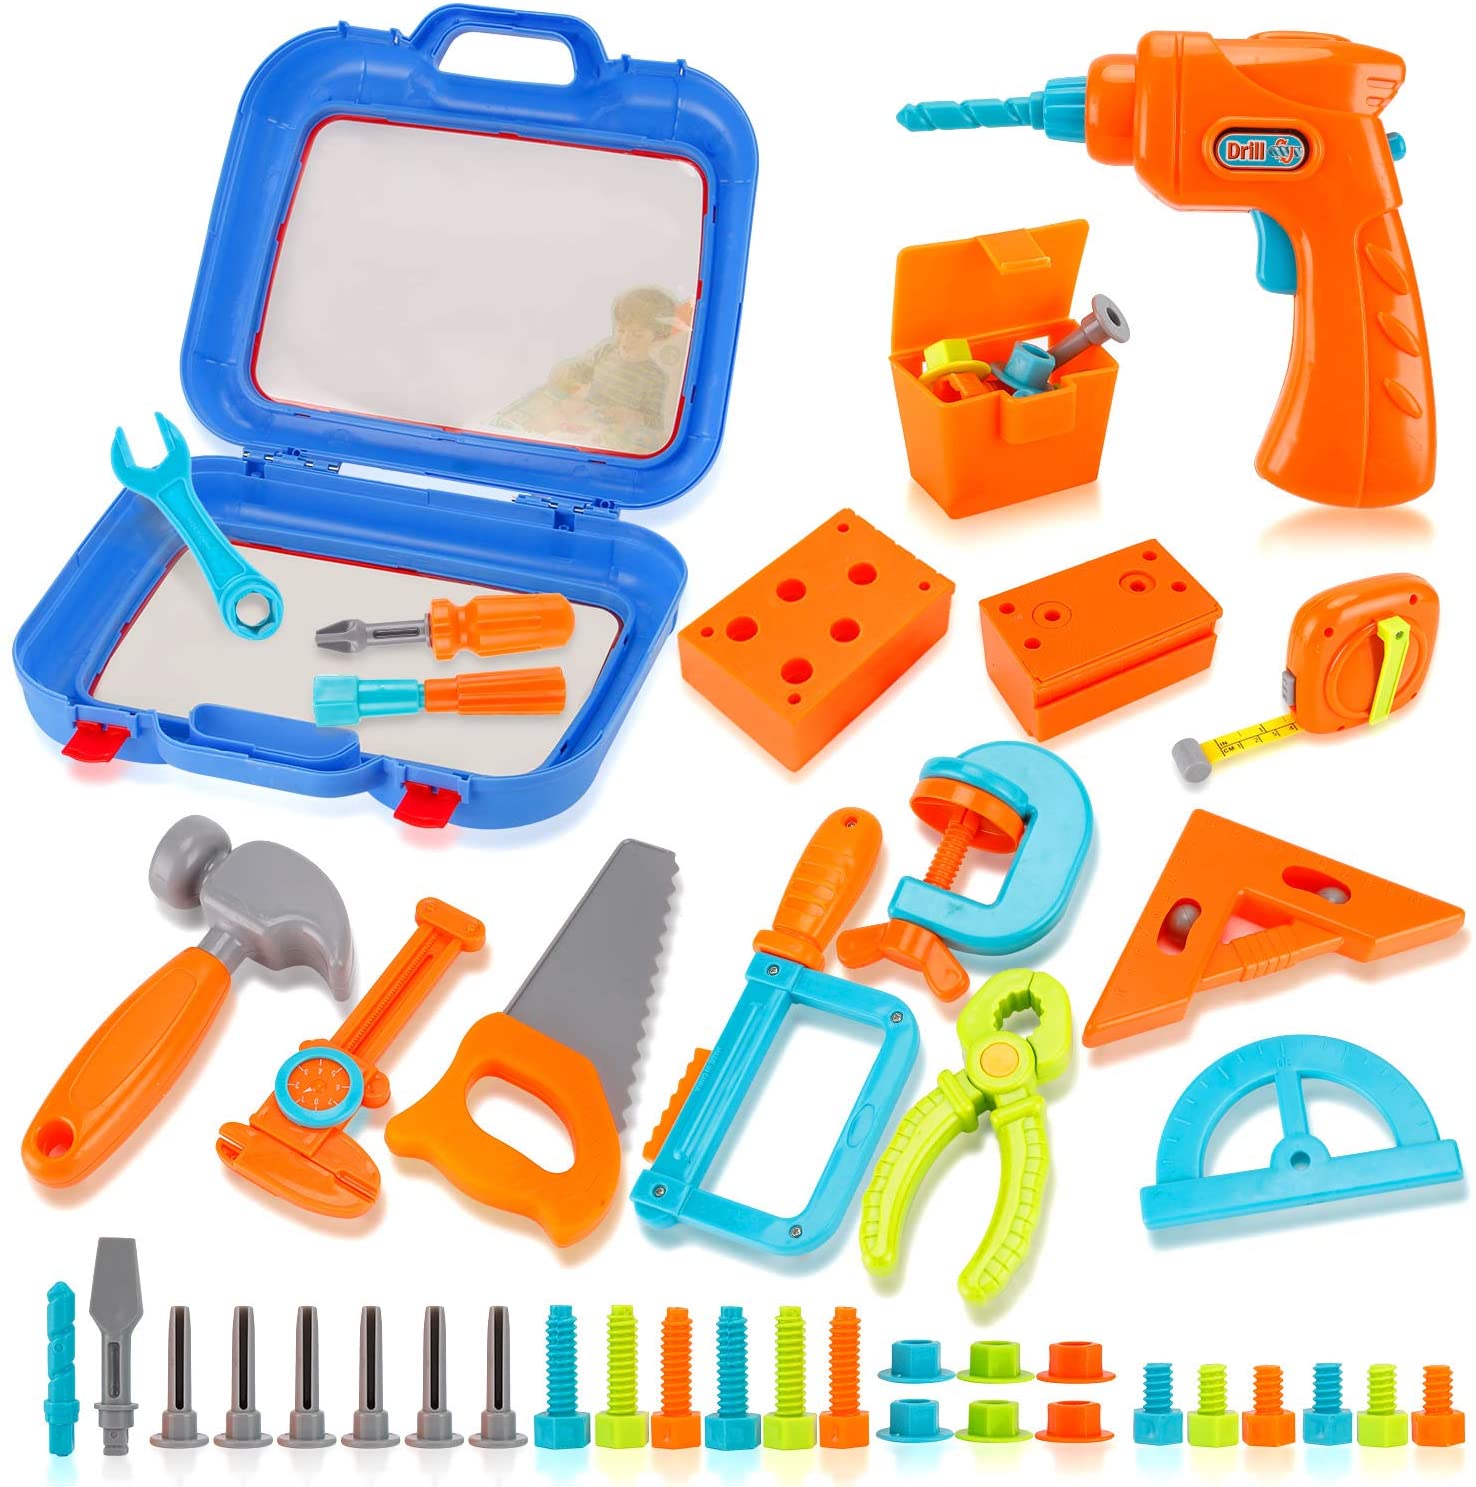 for sale online Liberty Imports Little Mechanic Power Tools Construction Toolbox Set for Kids 